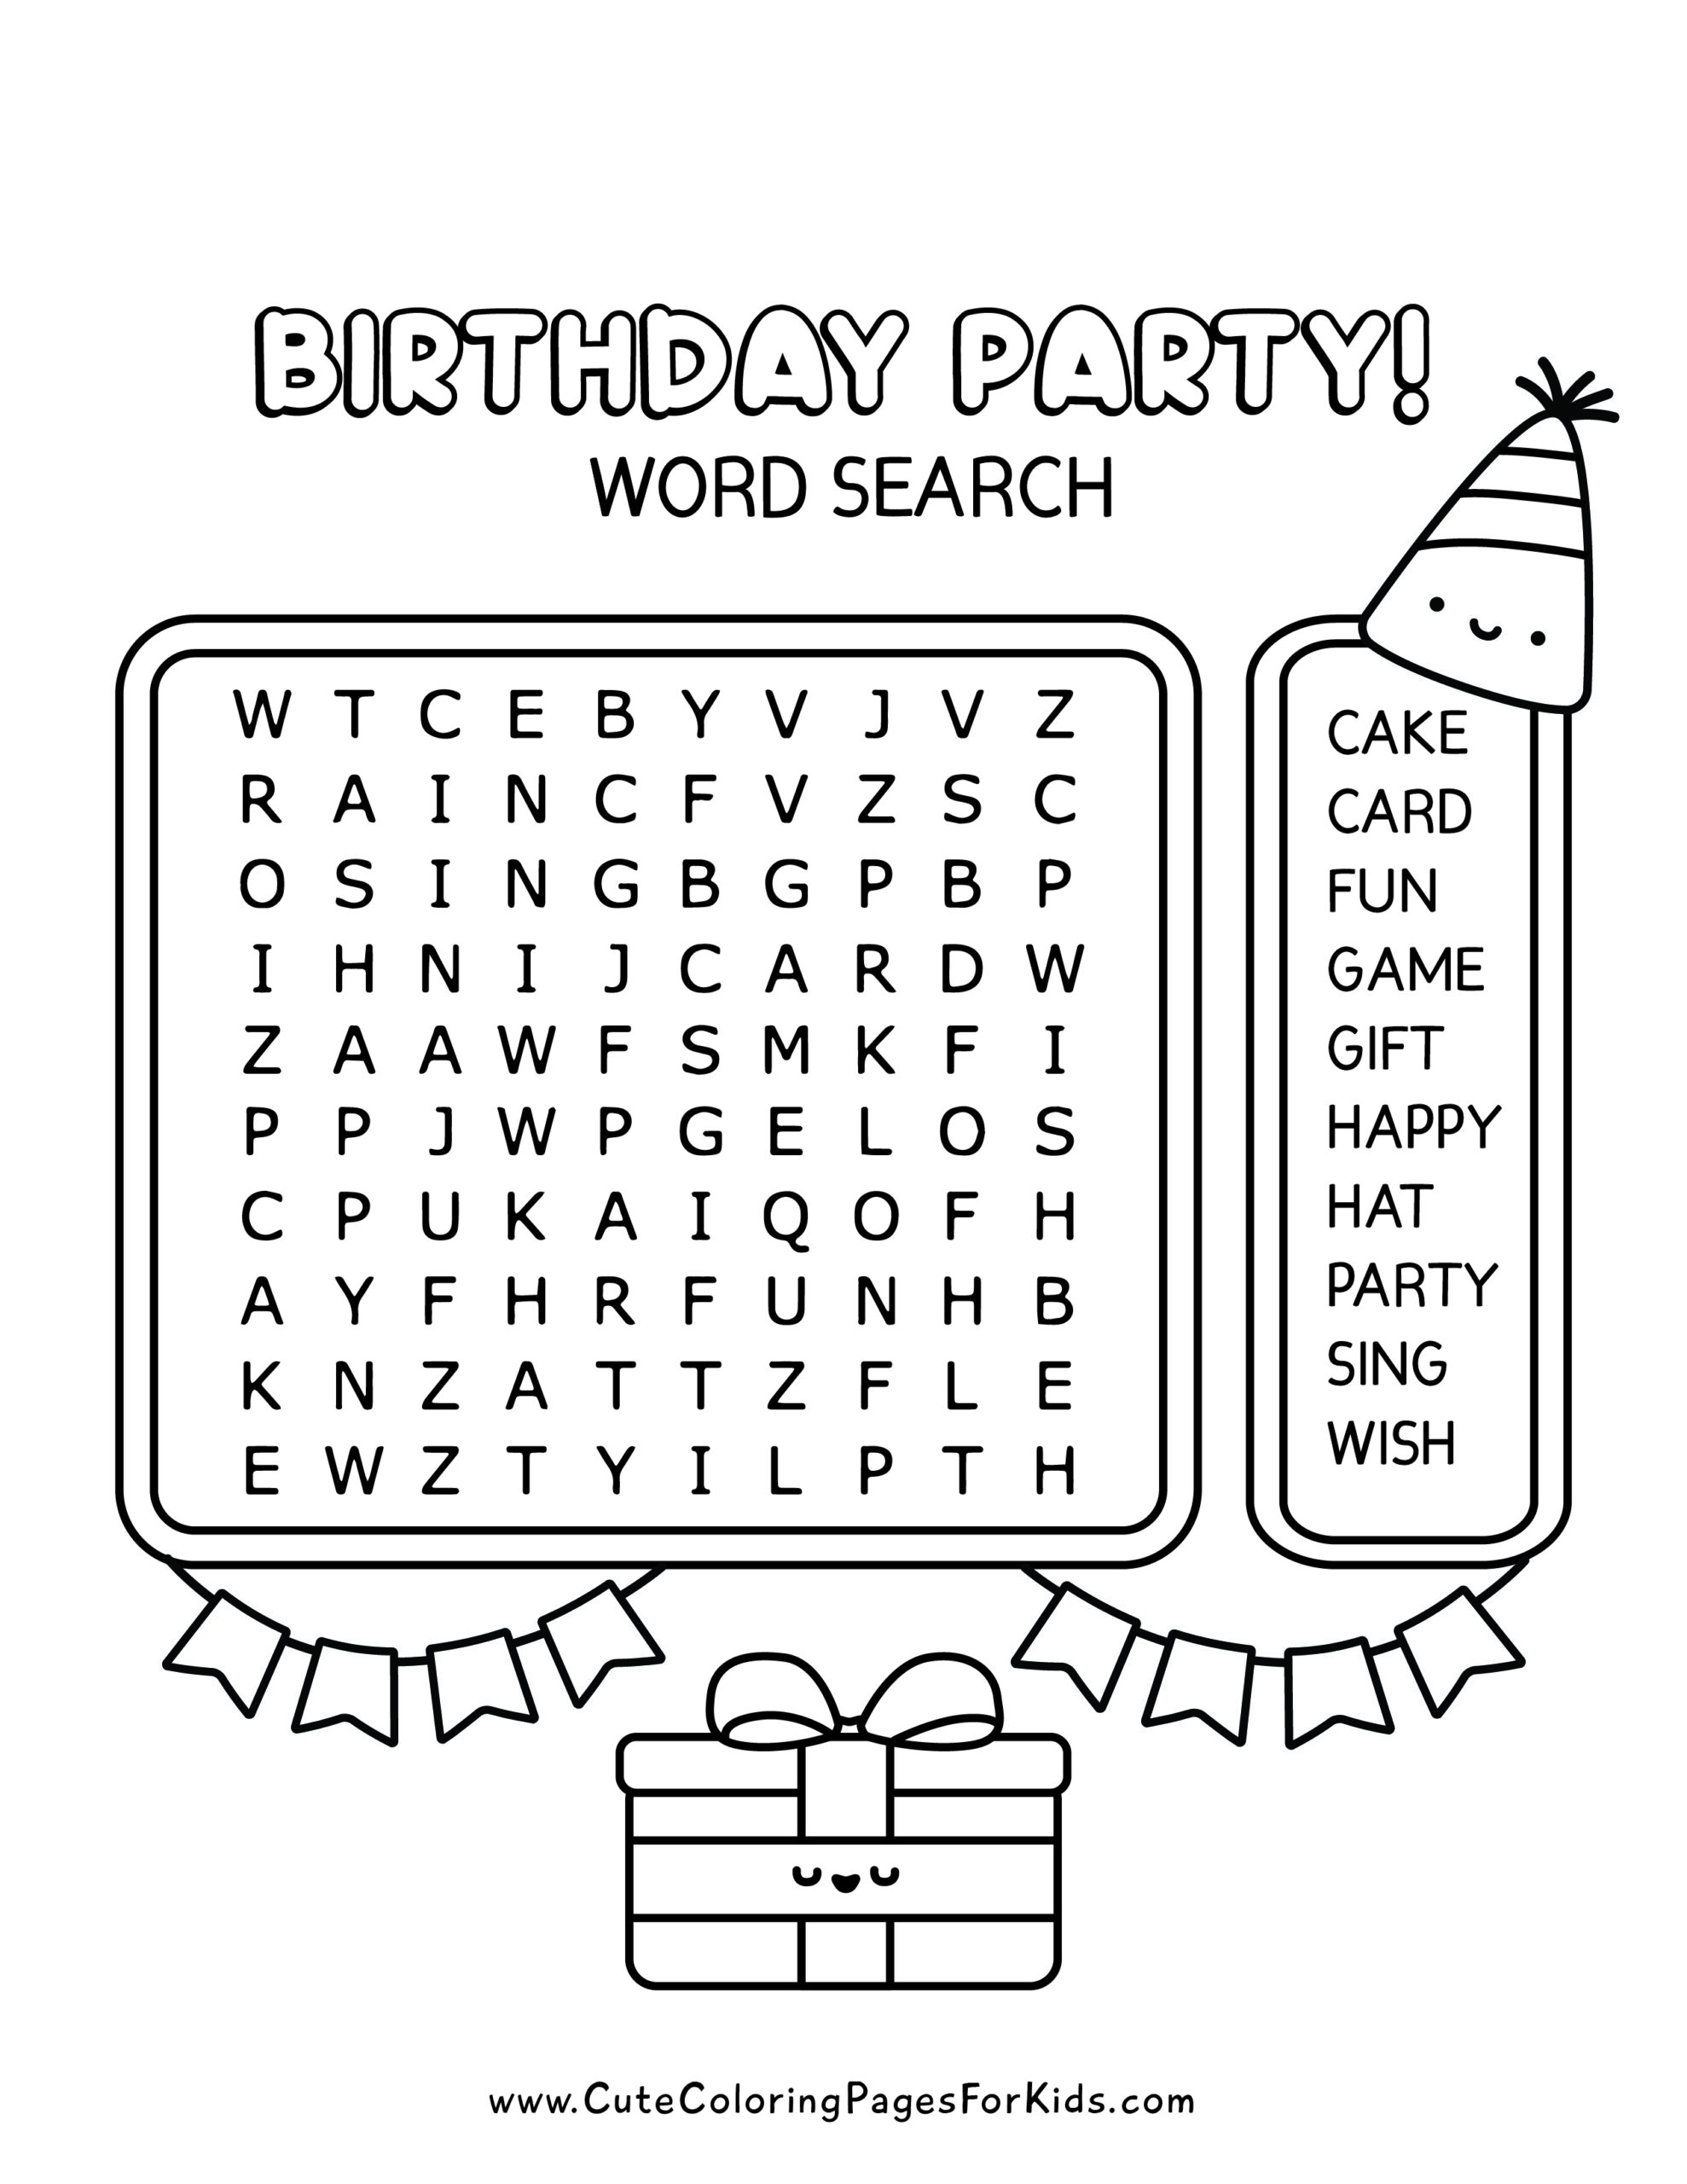 birthday-party-word-search-cute-coloring-pages-for-kids